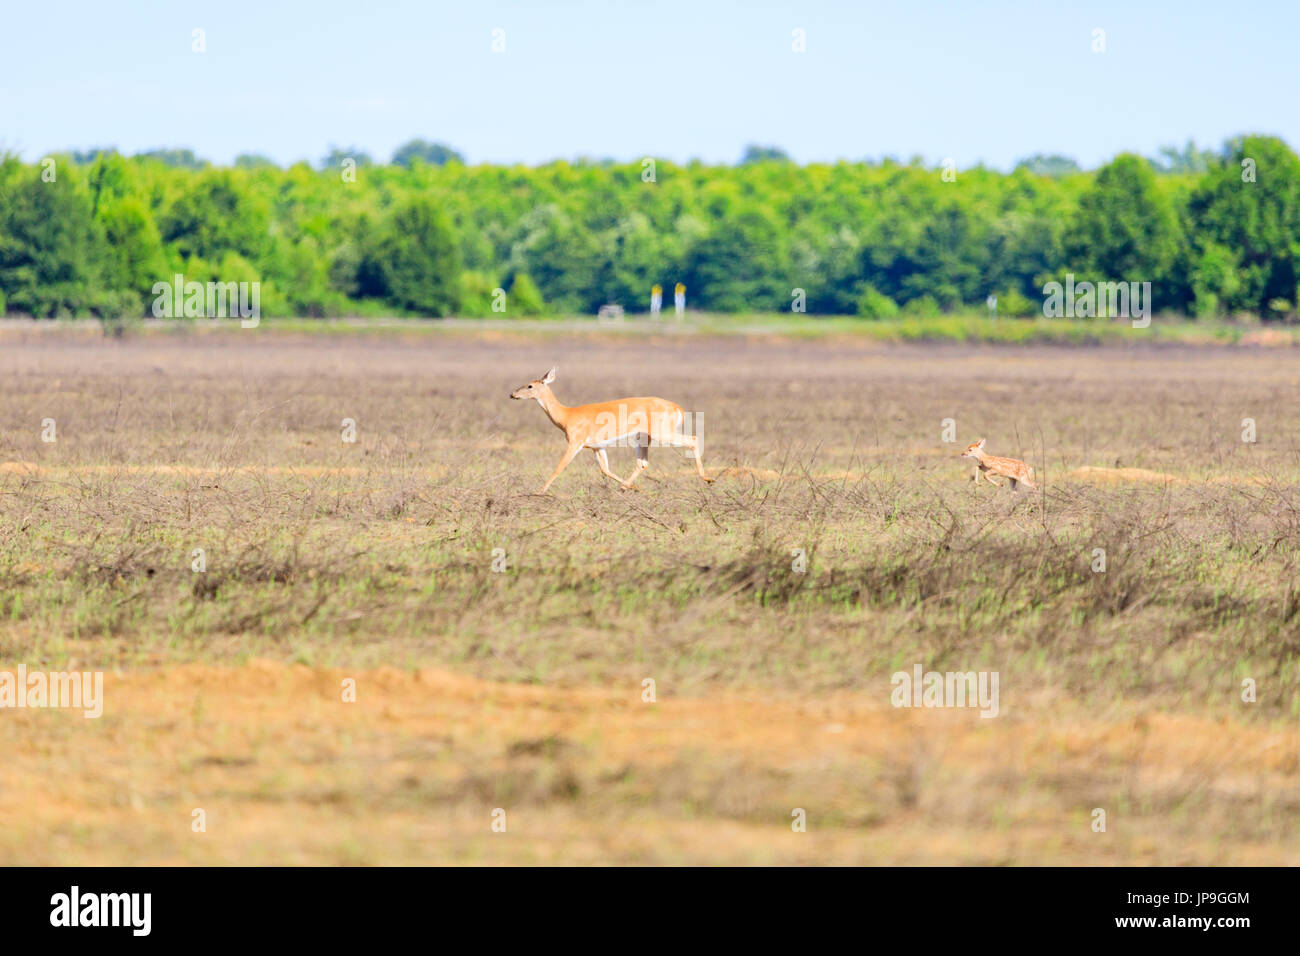 A white-tailed, Odocoileus virginianus, doe and her fawn walk across a field in Bald Knob Wildlife Refuge in Bald Knob, Arkansas Stock Photo